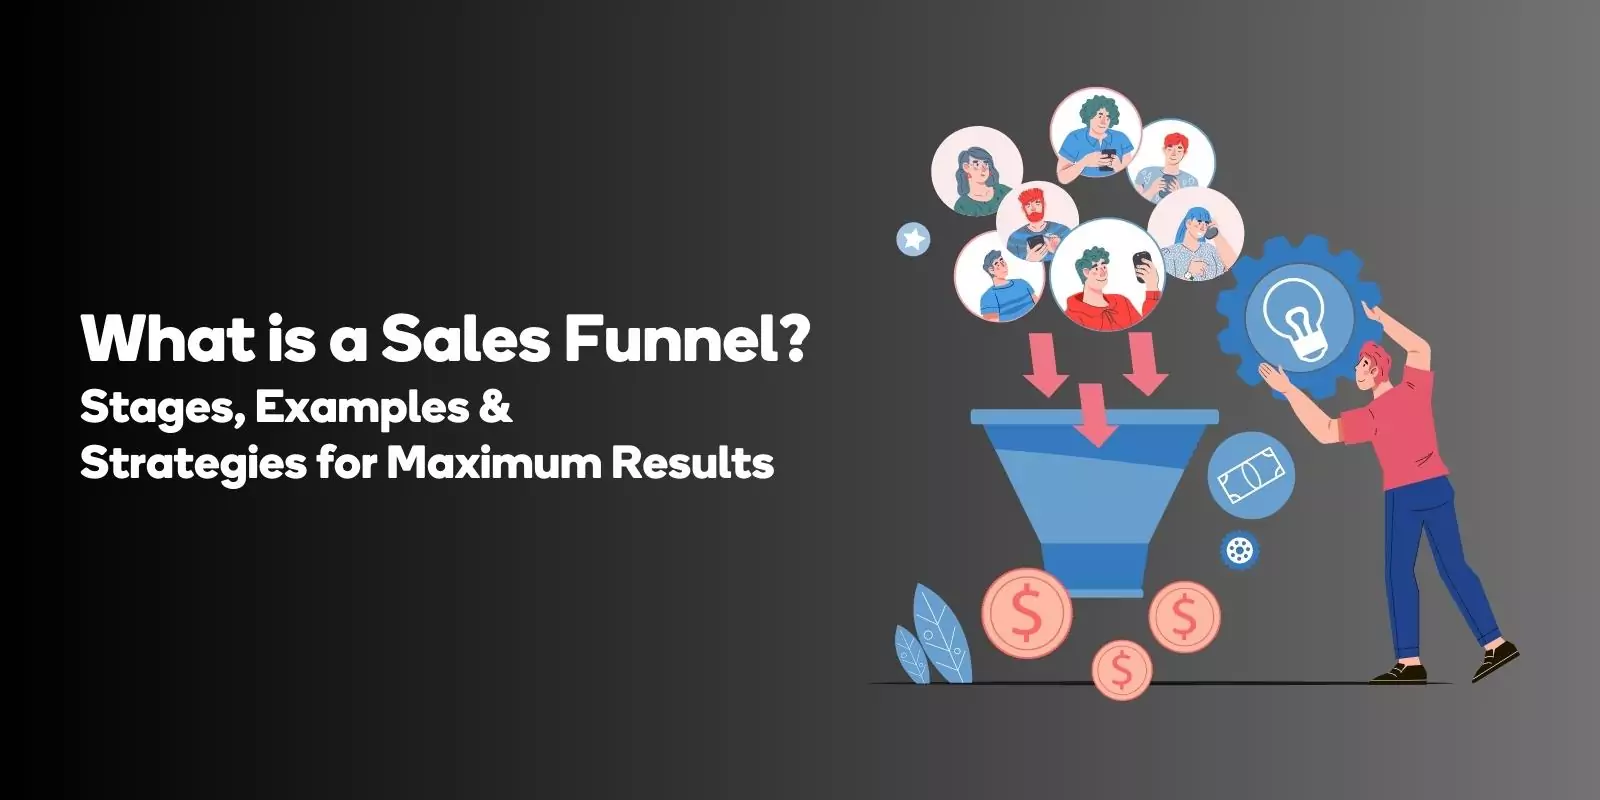 What is a Sales Funnel? Stages, Examples & Strategies for Maximum Results